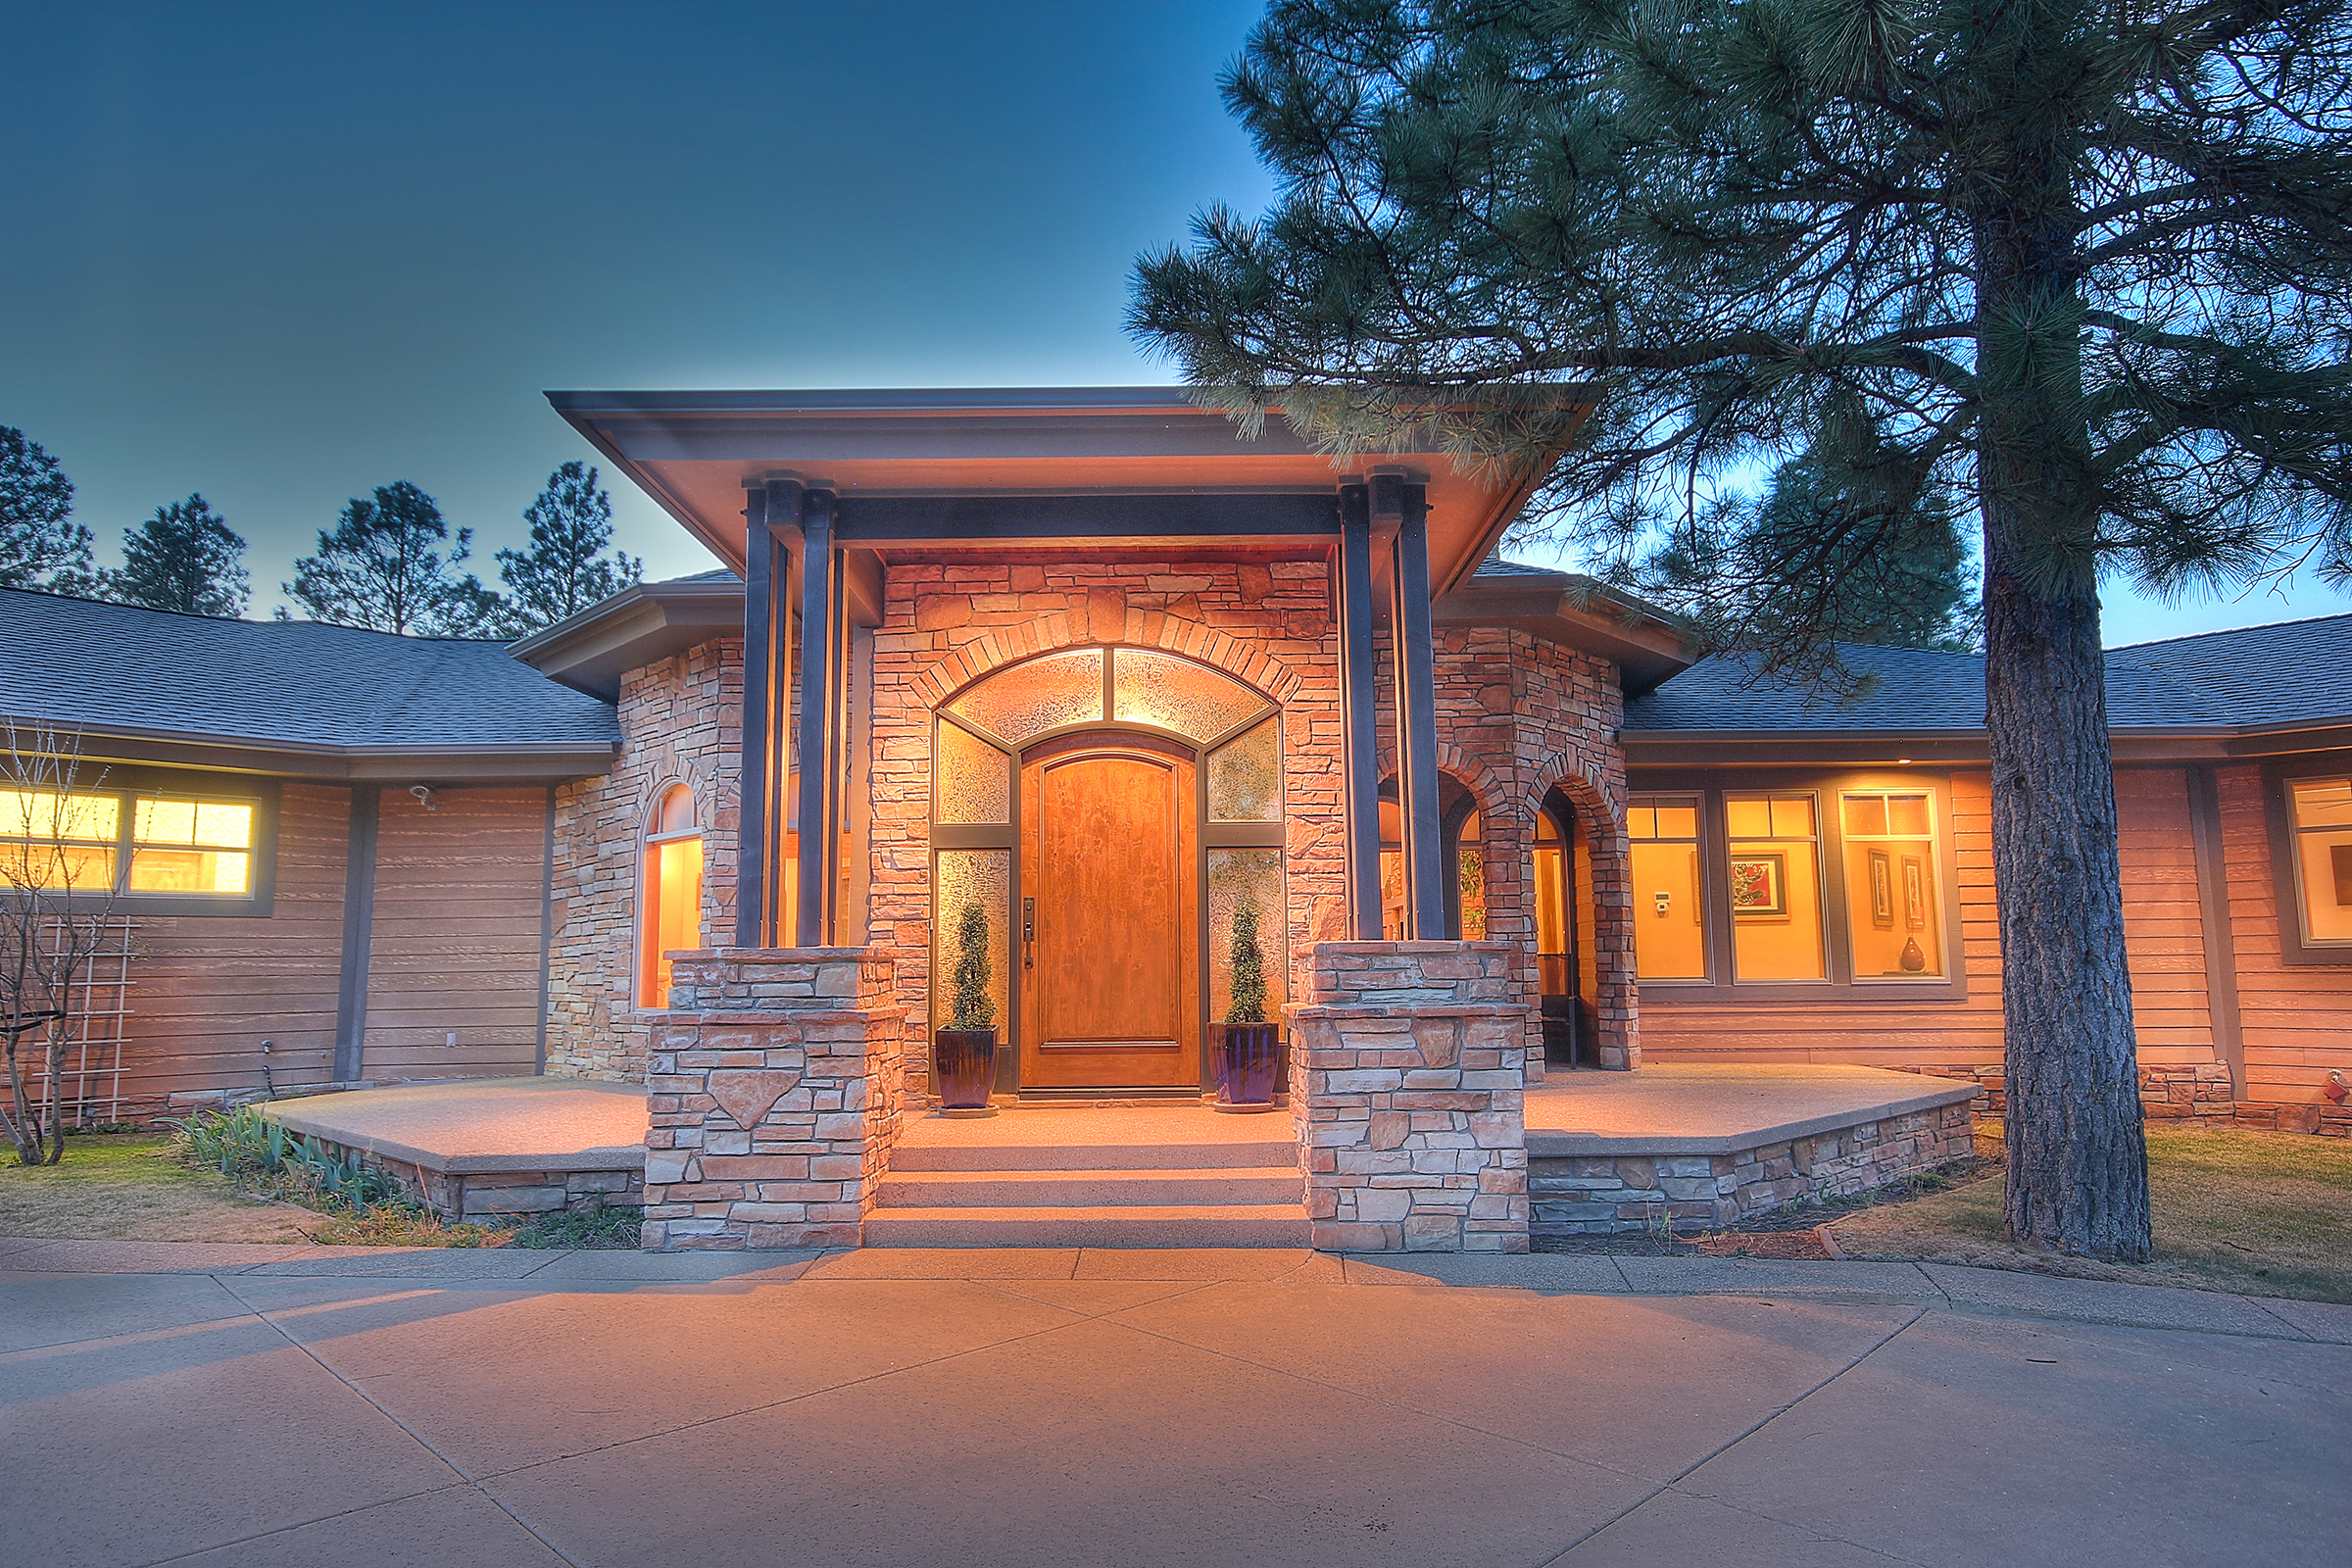 Search Flagstaff MLS for Flagstaff homes for sale